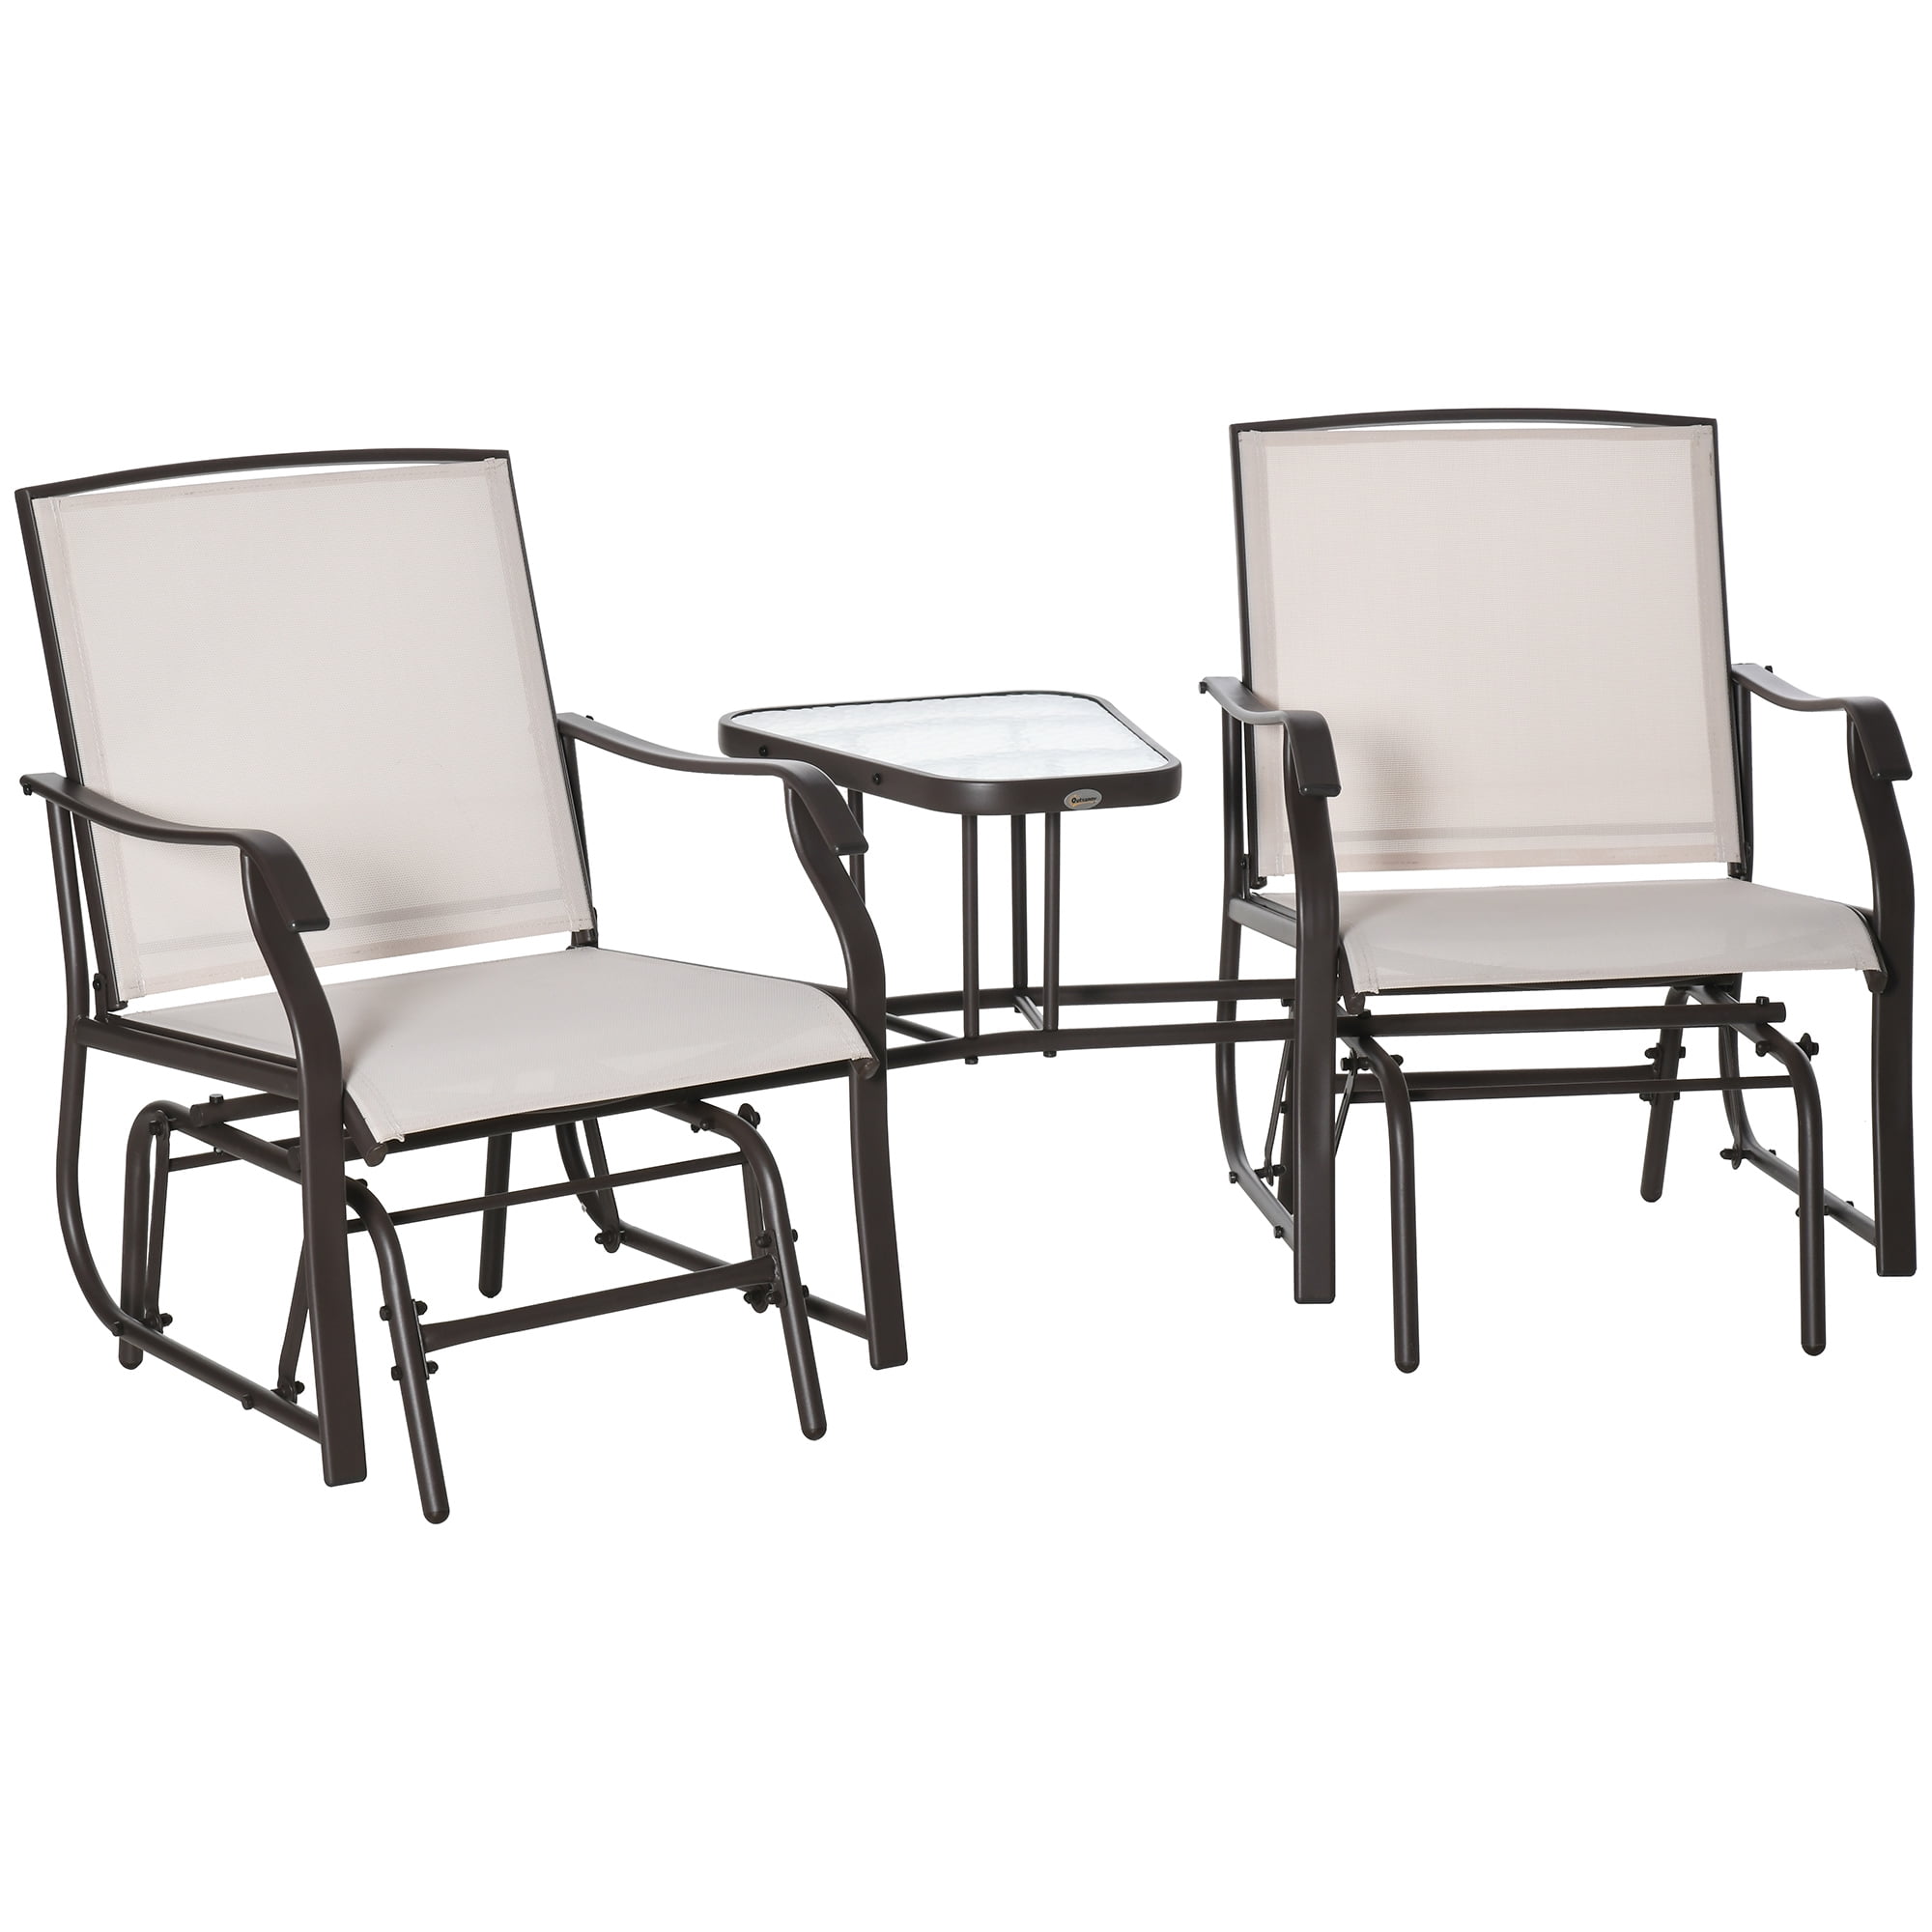 Outsunny Glider Rocking Chair & Table Set 2 Single Seaters Rocker Garden Swing Chair Patio Furniture Bistro Set